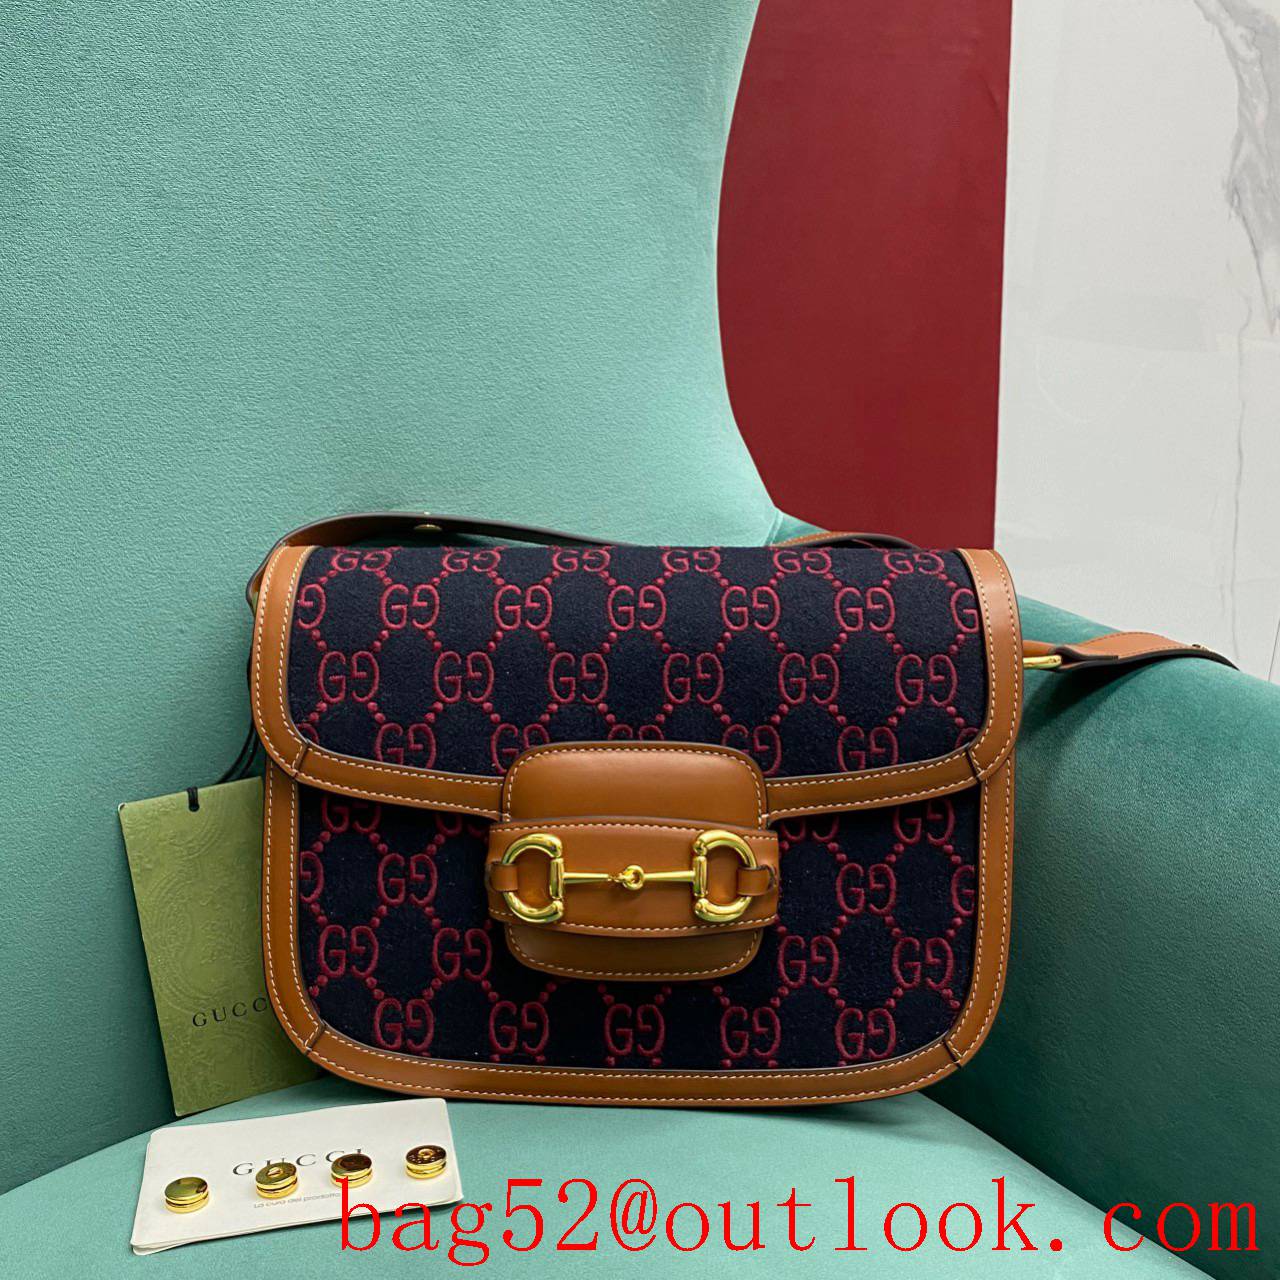 Gucci Burgundy lettering yellow leather trim with signature gg suede women's handbag